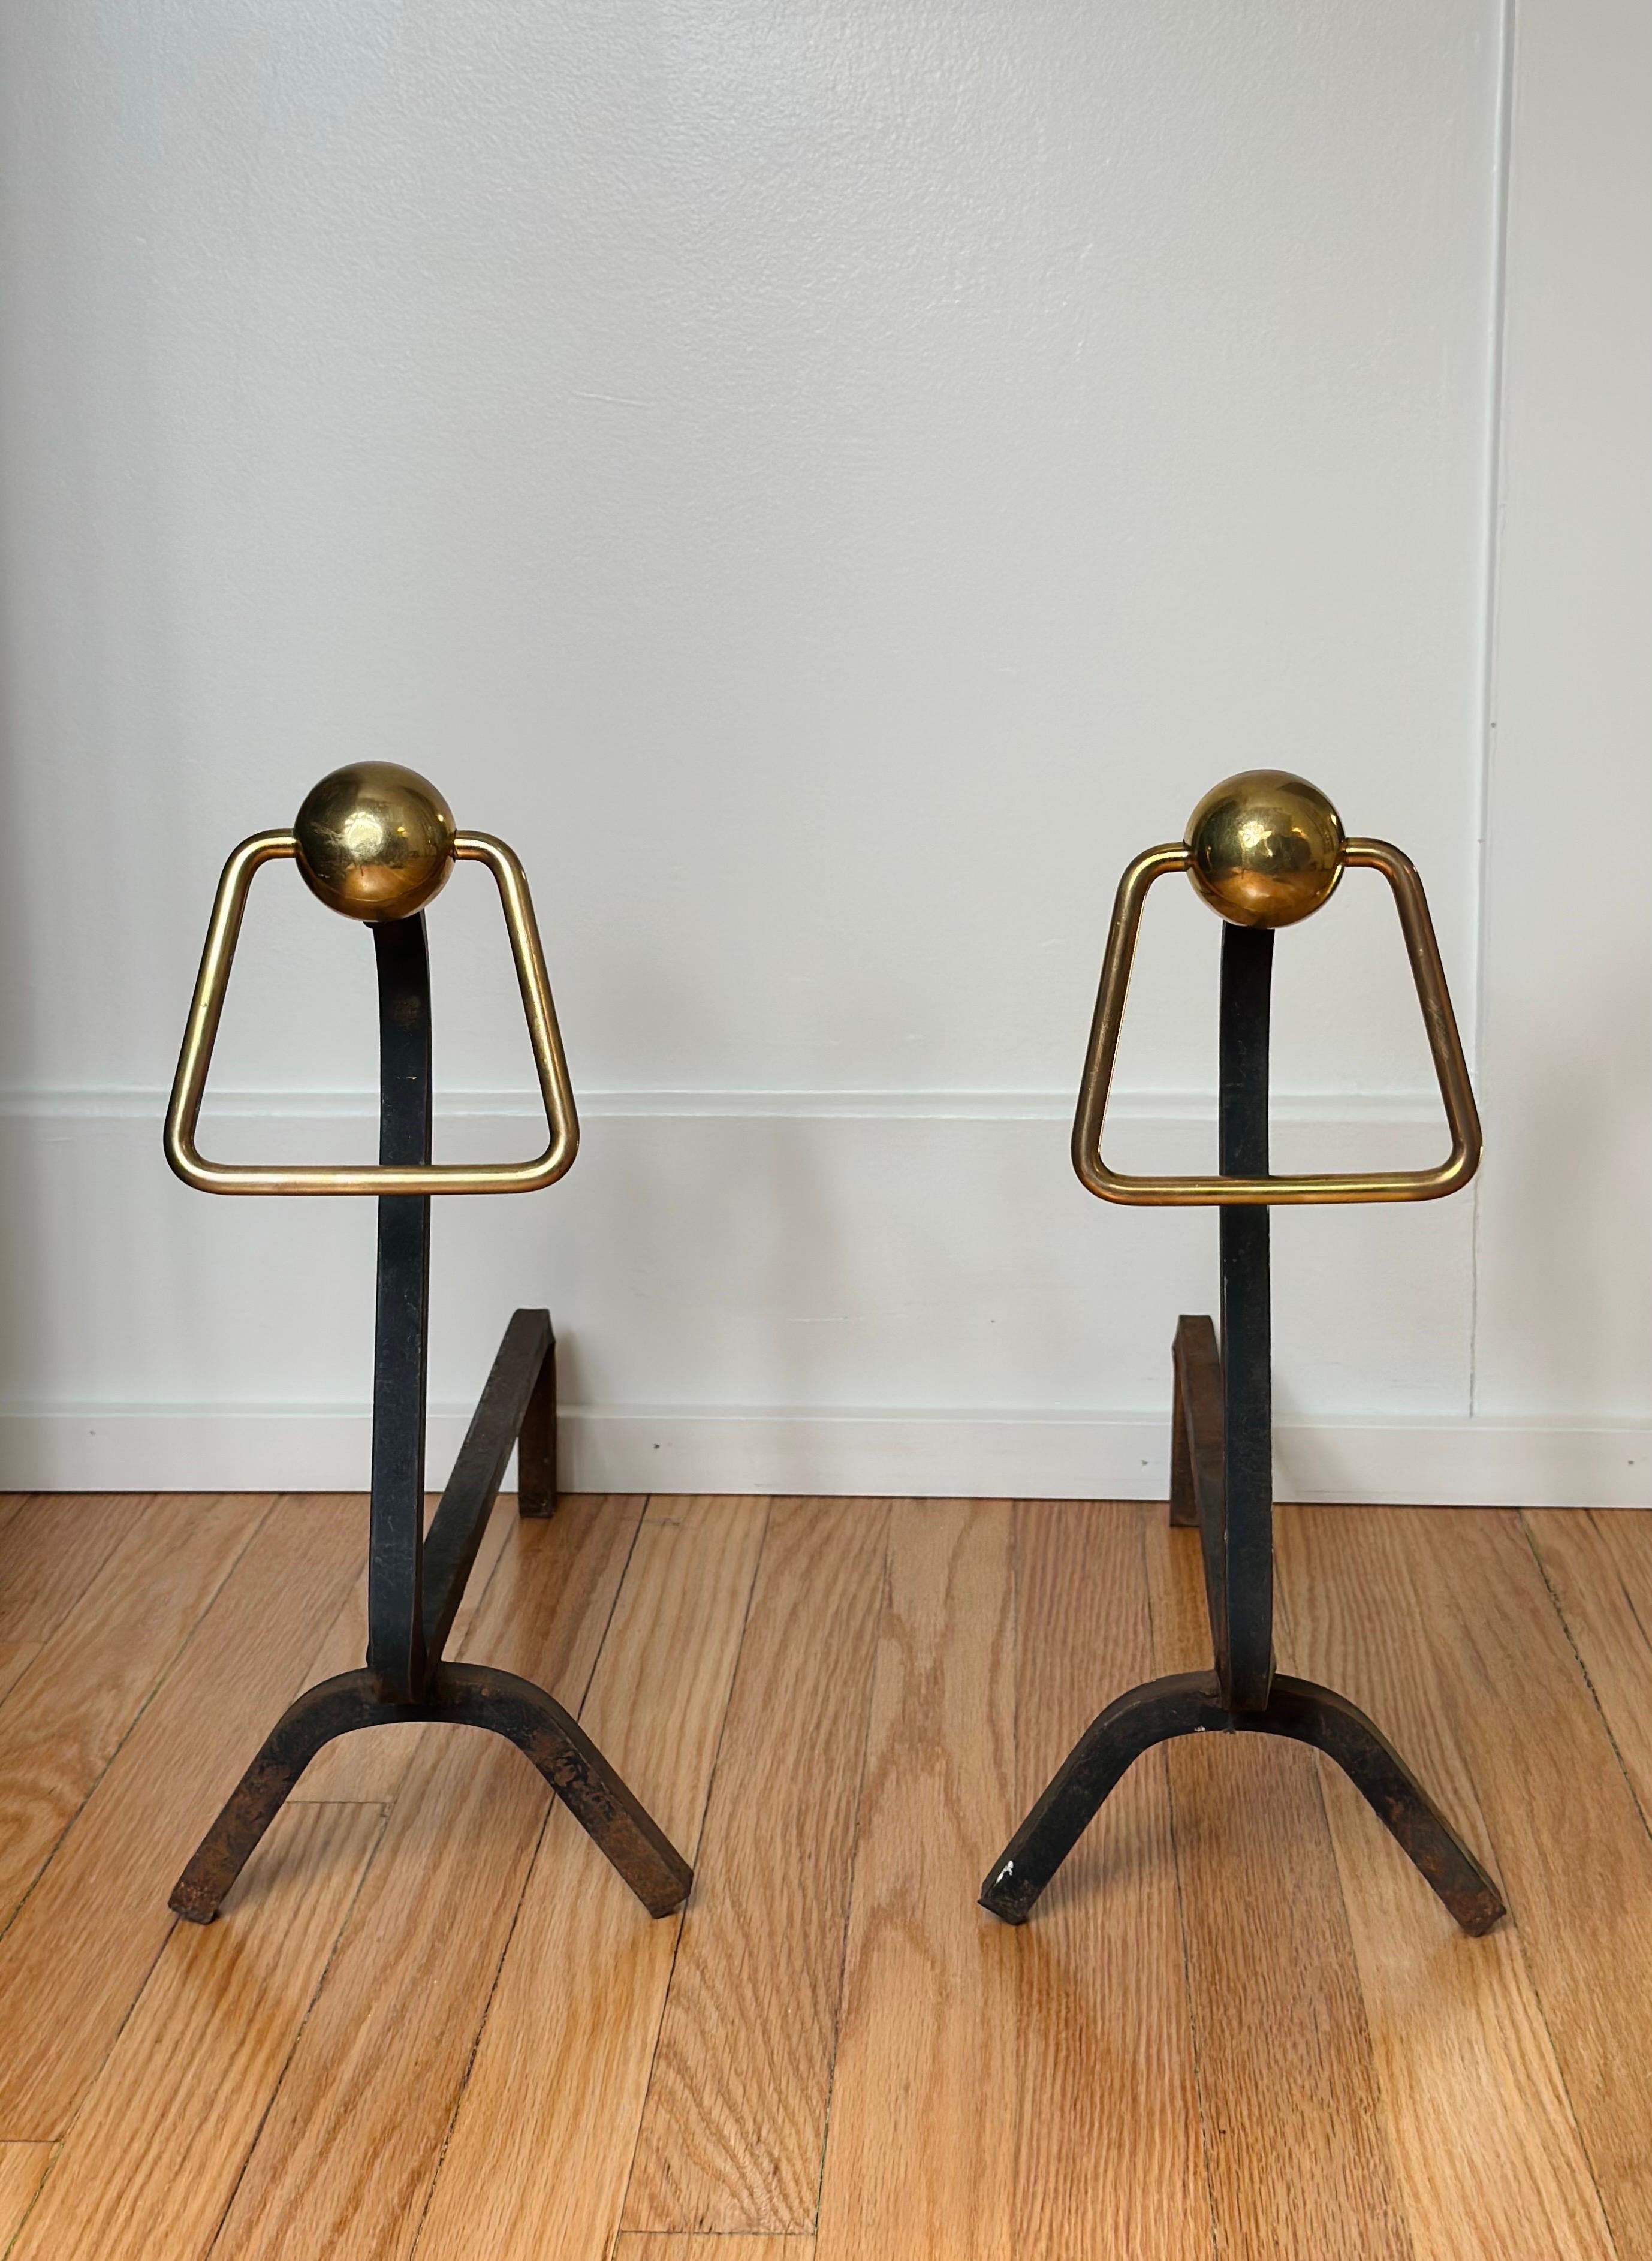 We are very pleased to offer a pair of Modernist andirons, circa the 1940s.  Crafted with meticulous attention to detail, these andirons seamlessly merge wrought iron and brass elements.  The wrought iron is shaped into a sleek and streamlined